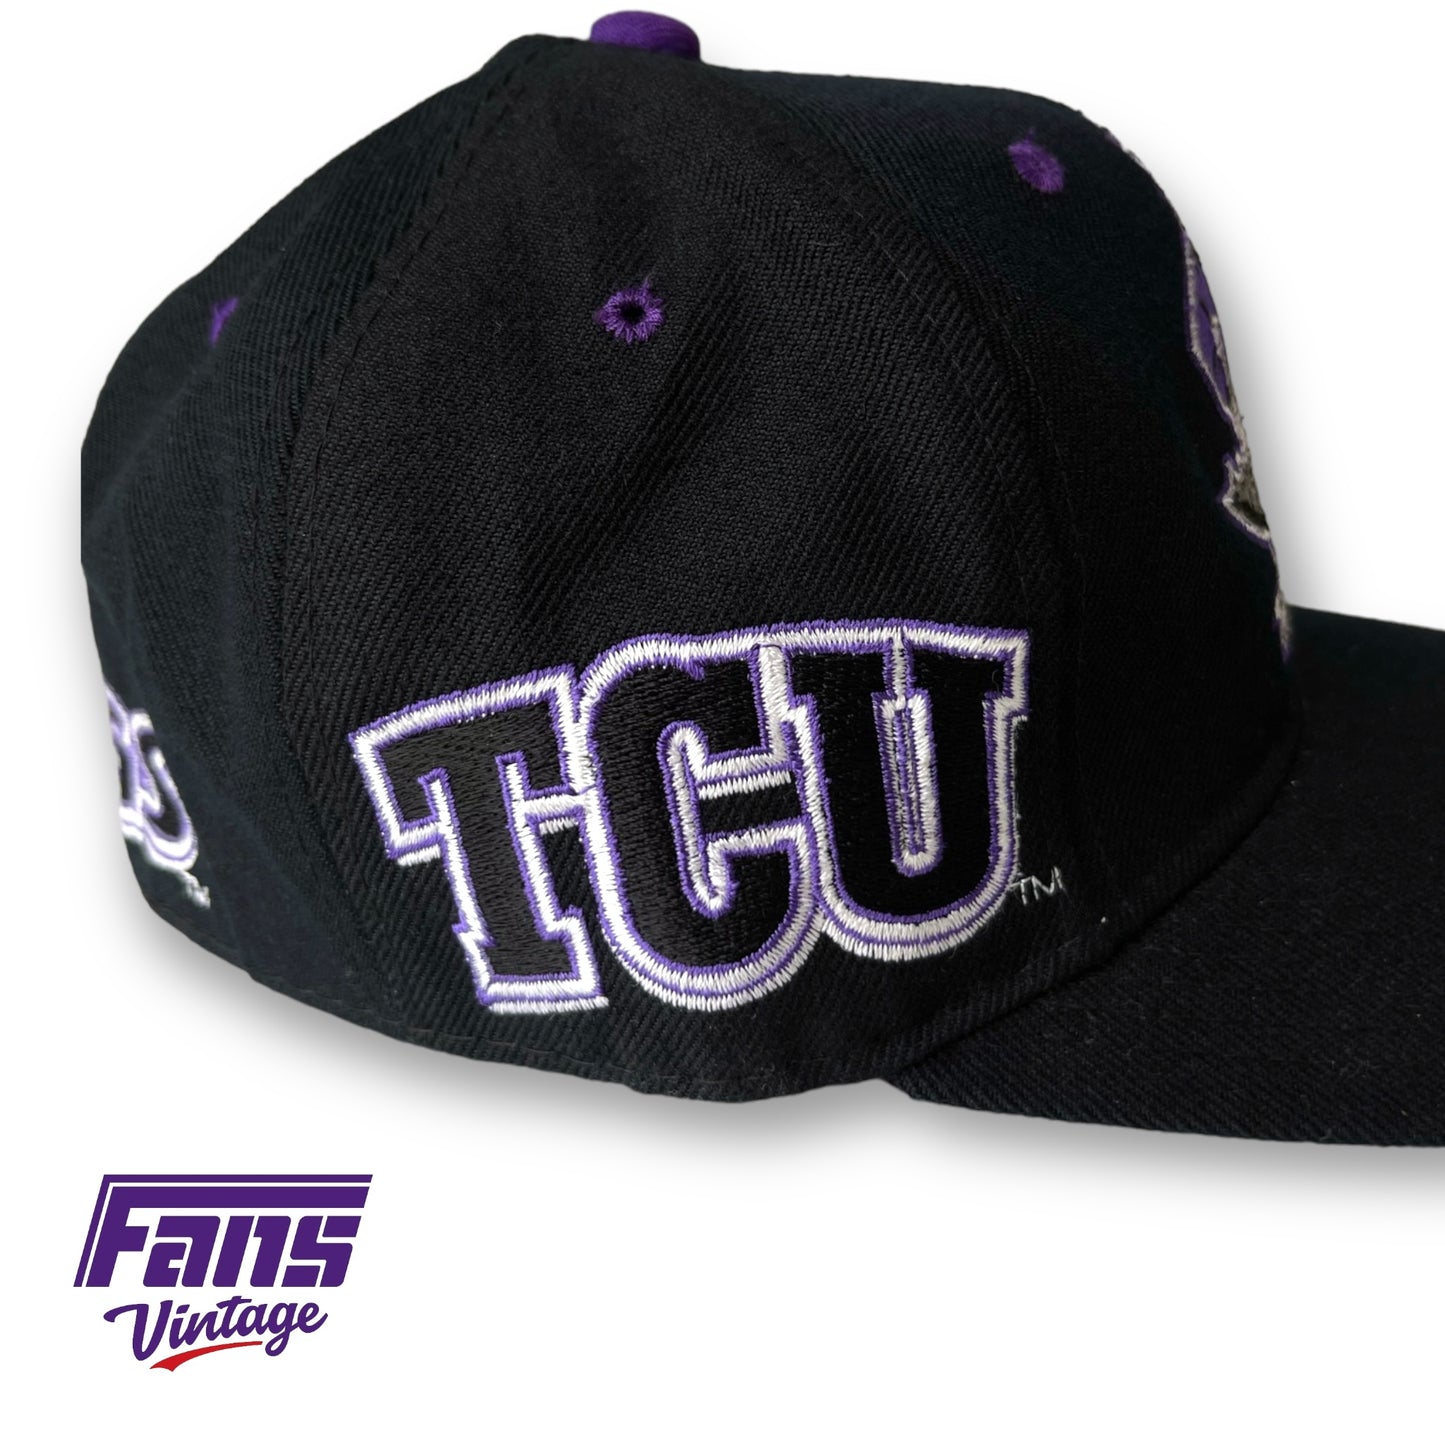 Amazing Vintage TCU Hat with GIANT embroidered logos!